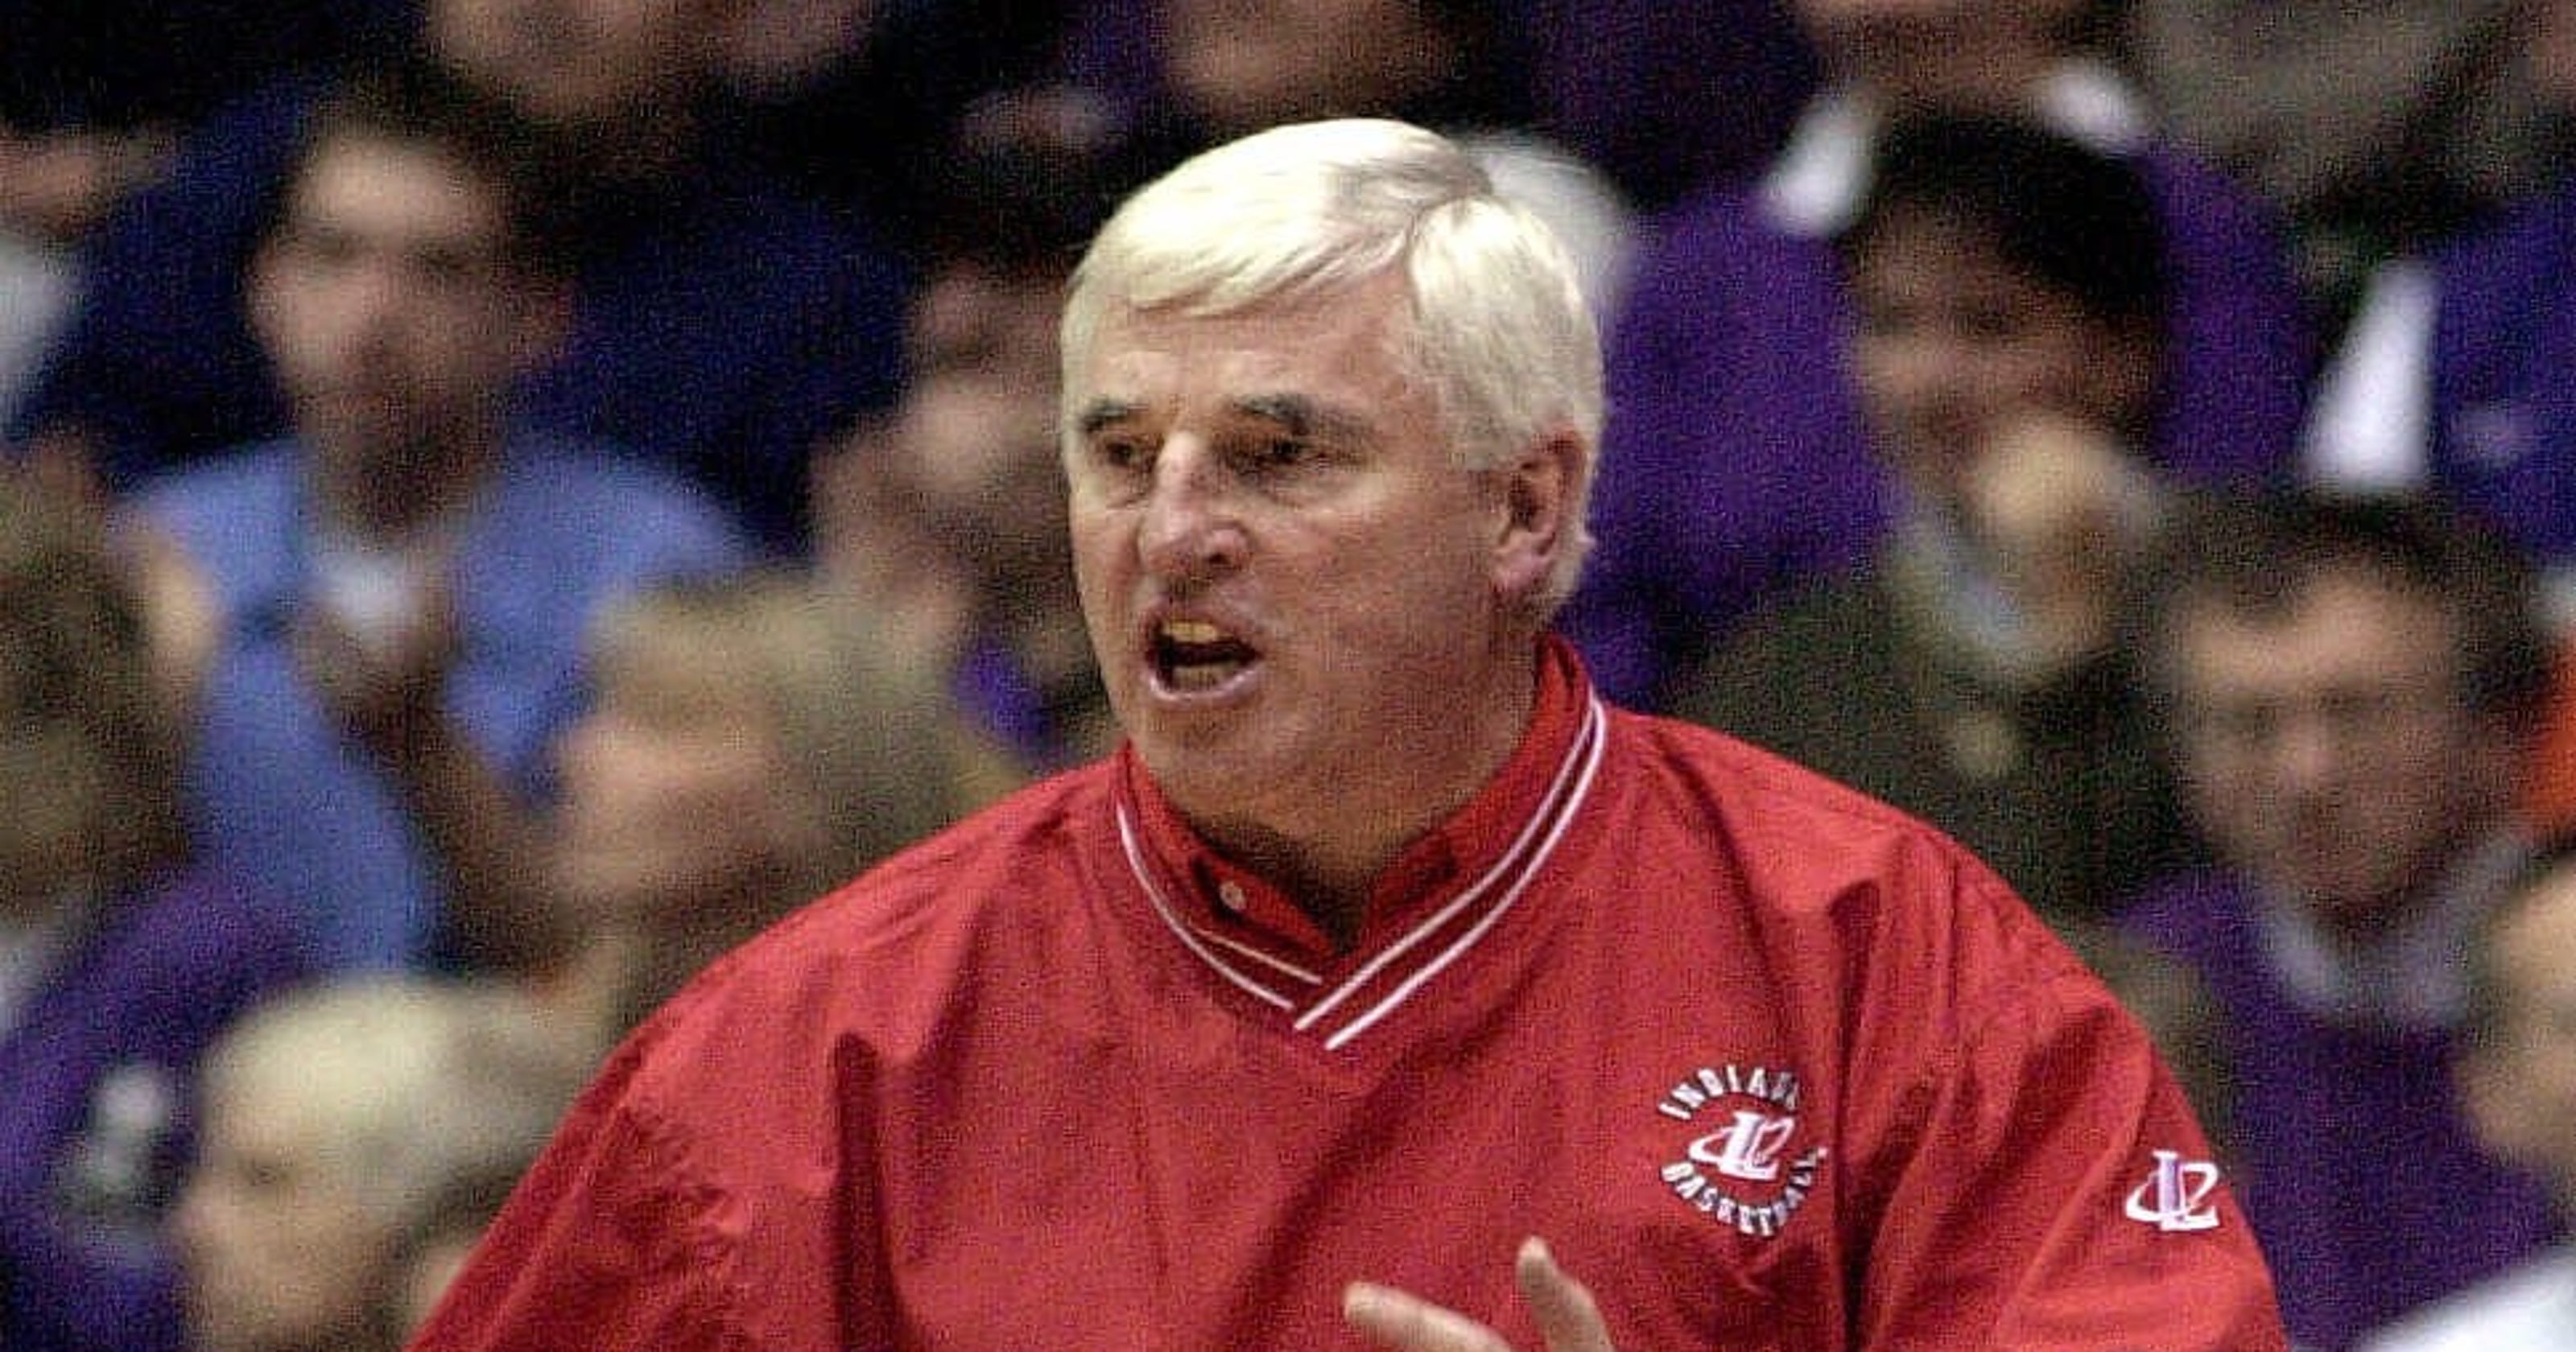 Bobby Knight 'not well,' longtime Indiana Hoosiers radio voice says